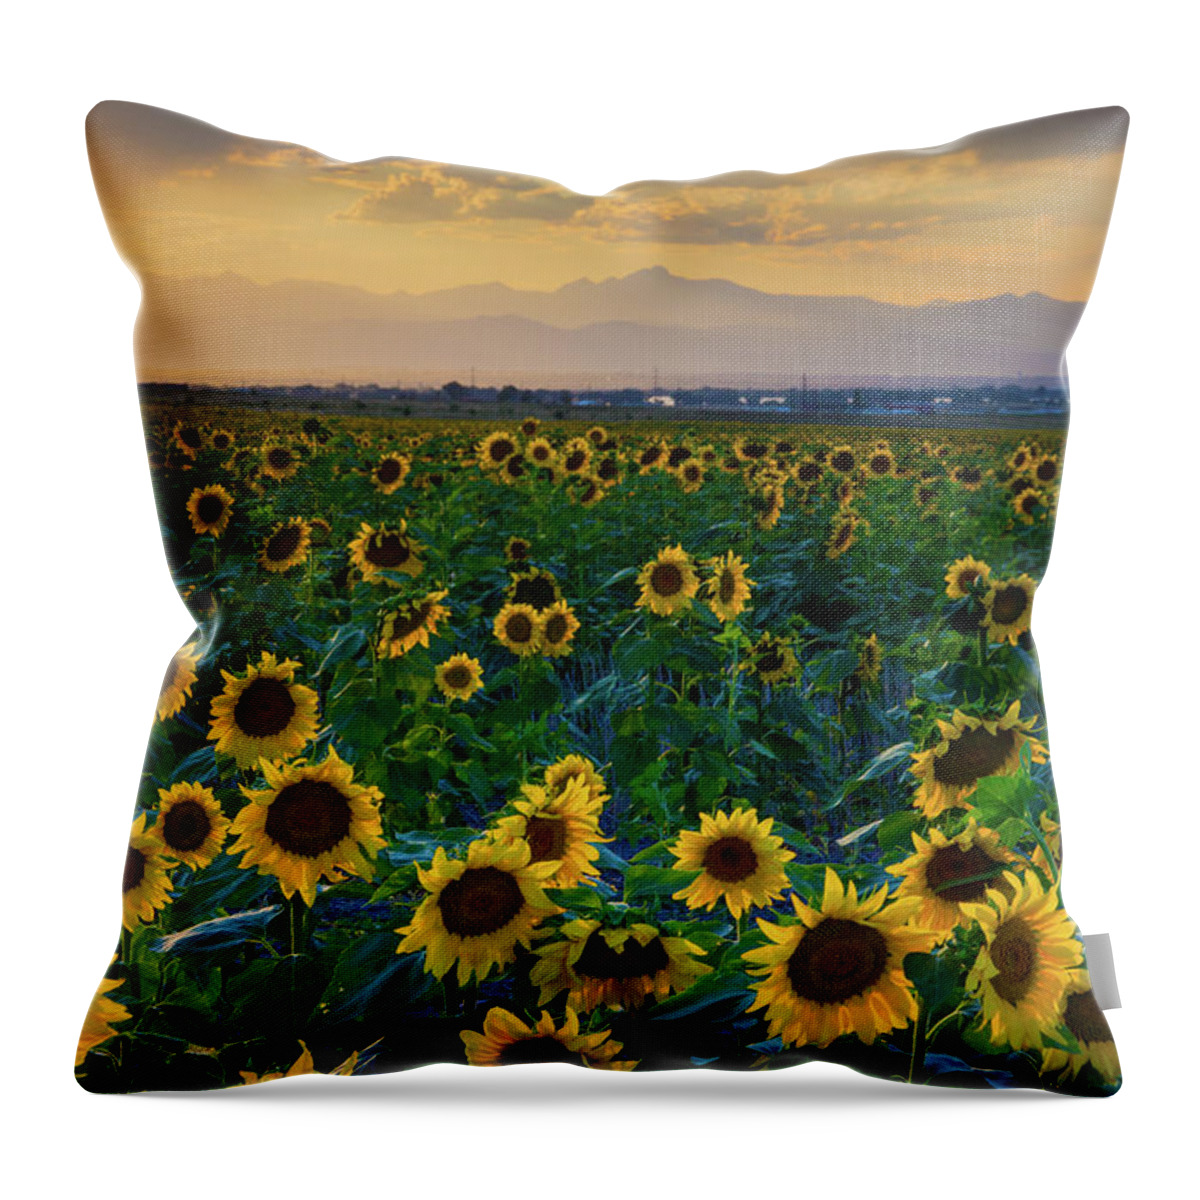 Colorado Throw Pillow featuring the photograph Summer Skies and Sunflowers by John De Bord